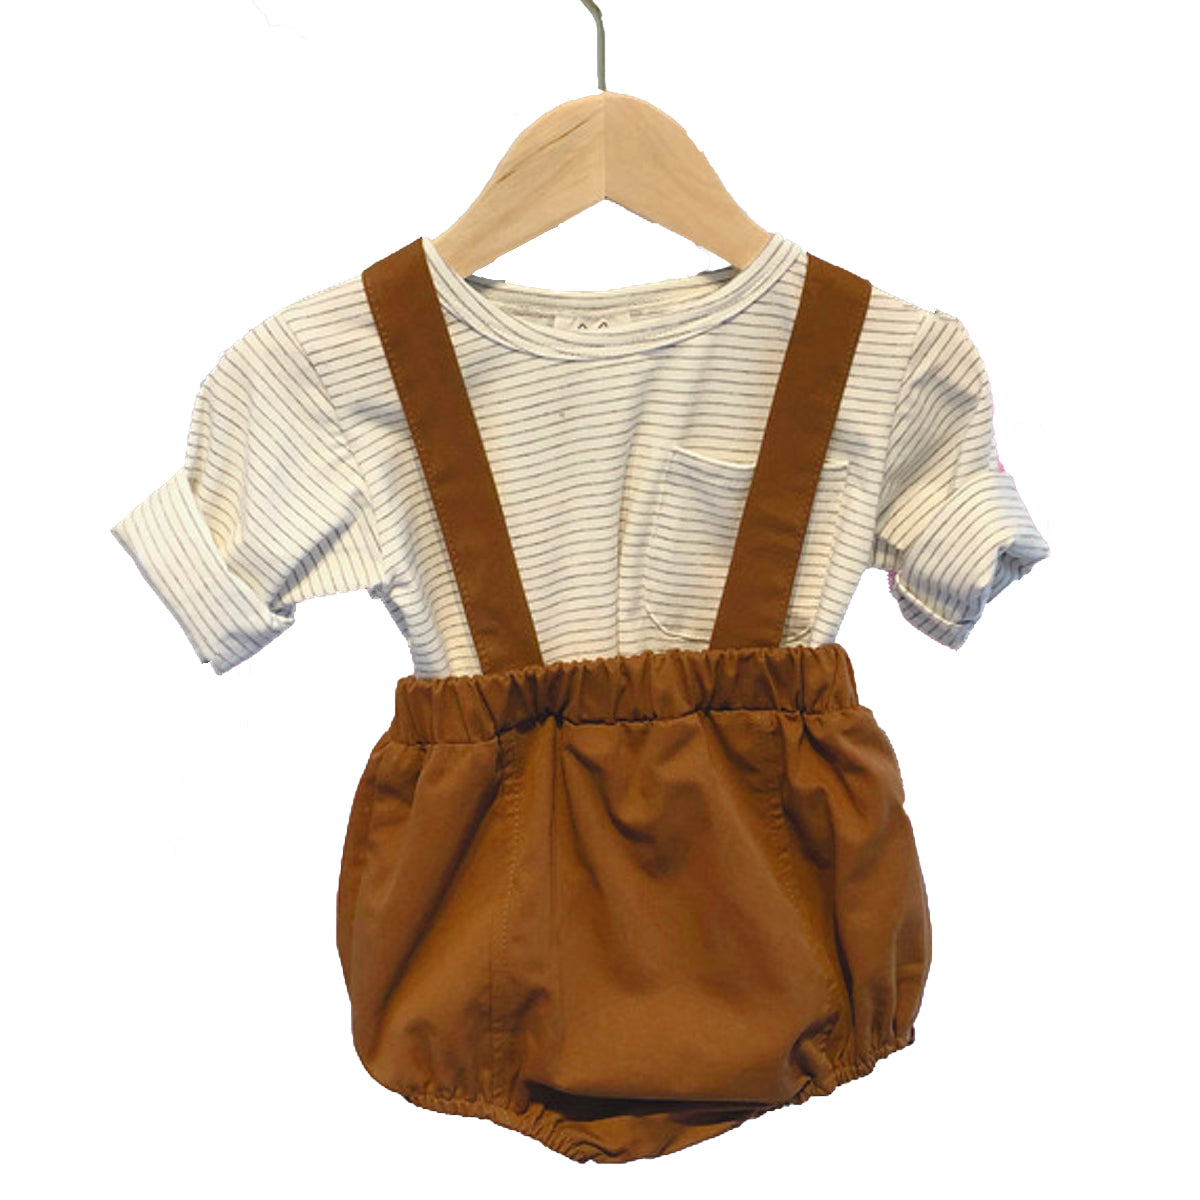 Joon Romper Set - Brown and White